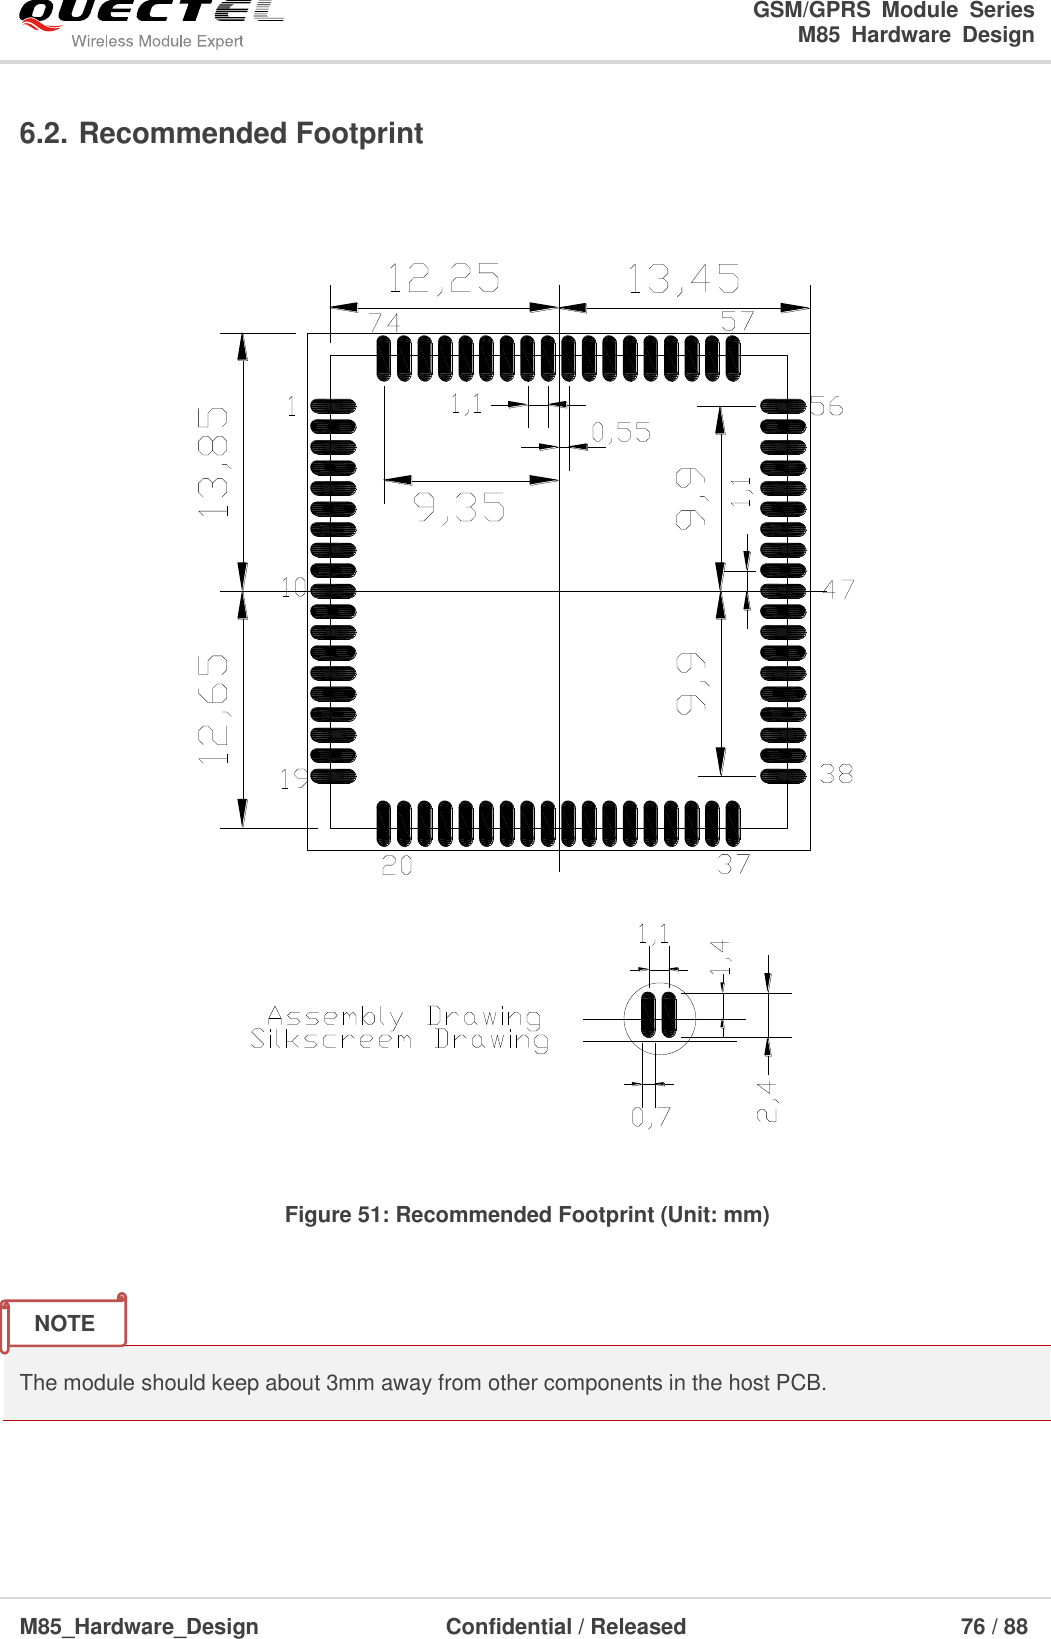                                                                                                                                               GSM/GPRS  Module  Series                                                                 M85  Hardware  Design  M85_Hardware_Design                  Confidential / Released                             76 / 88      6.2. Recommended Footprint  Figure 51: Recommended Footprint (Unit: mm)   The module should keep about 3mm away from other components in the host PCB.  NOTE 